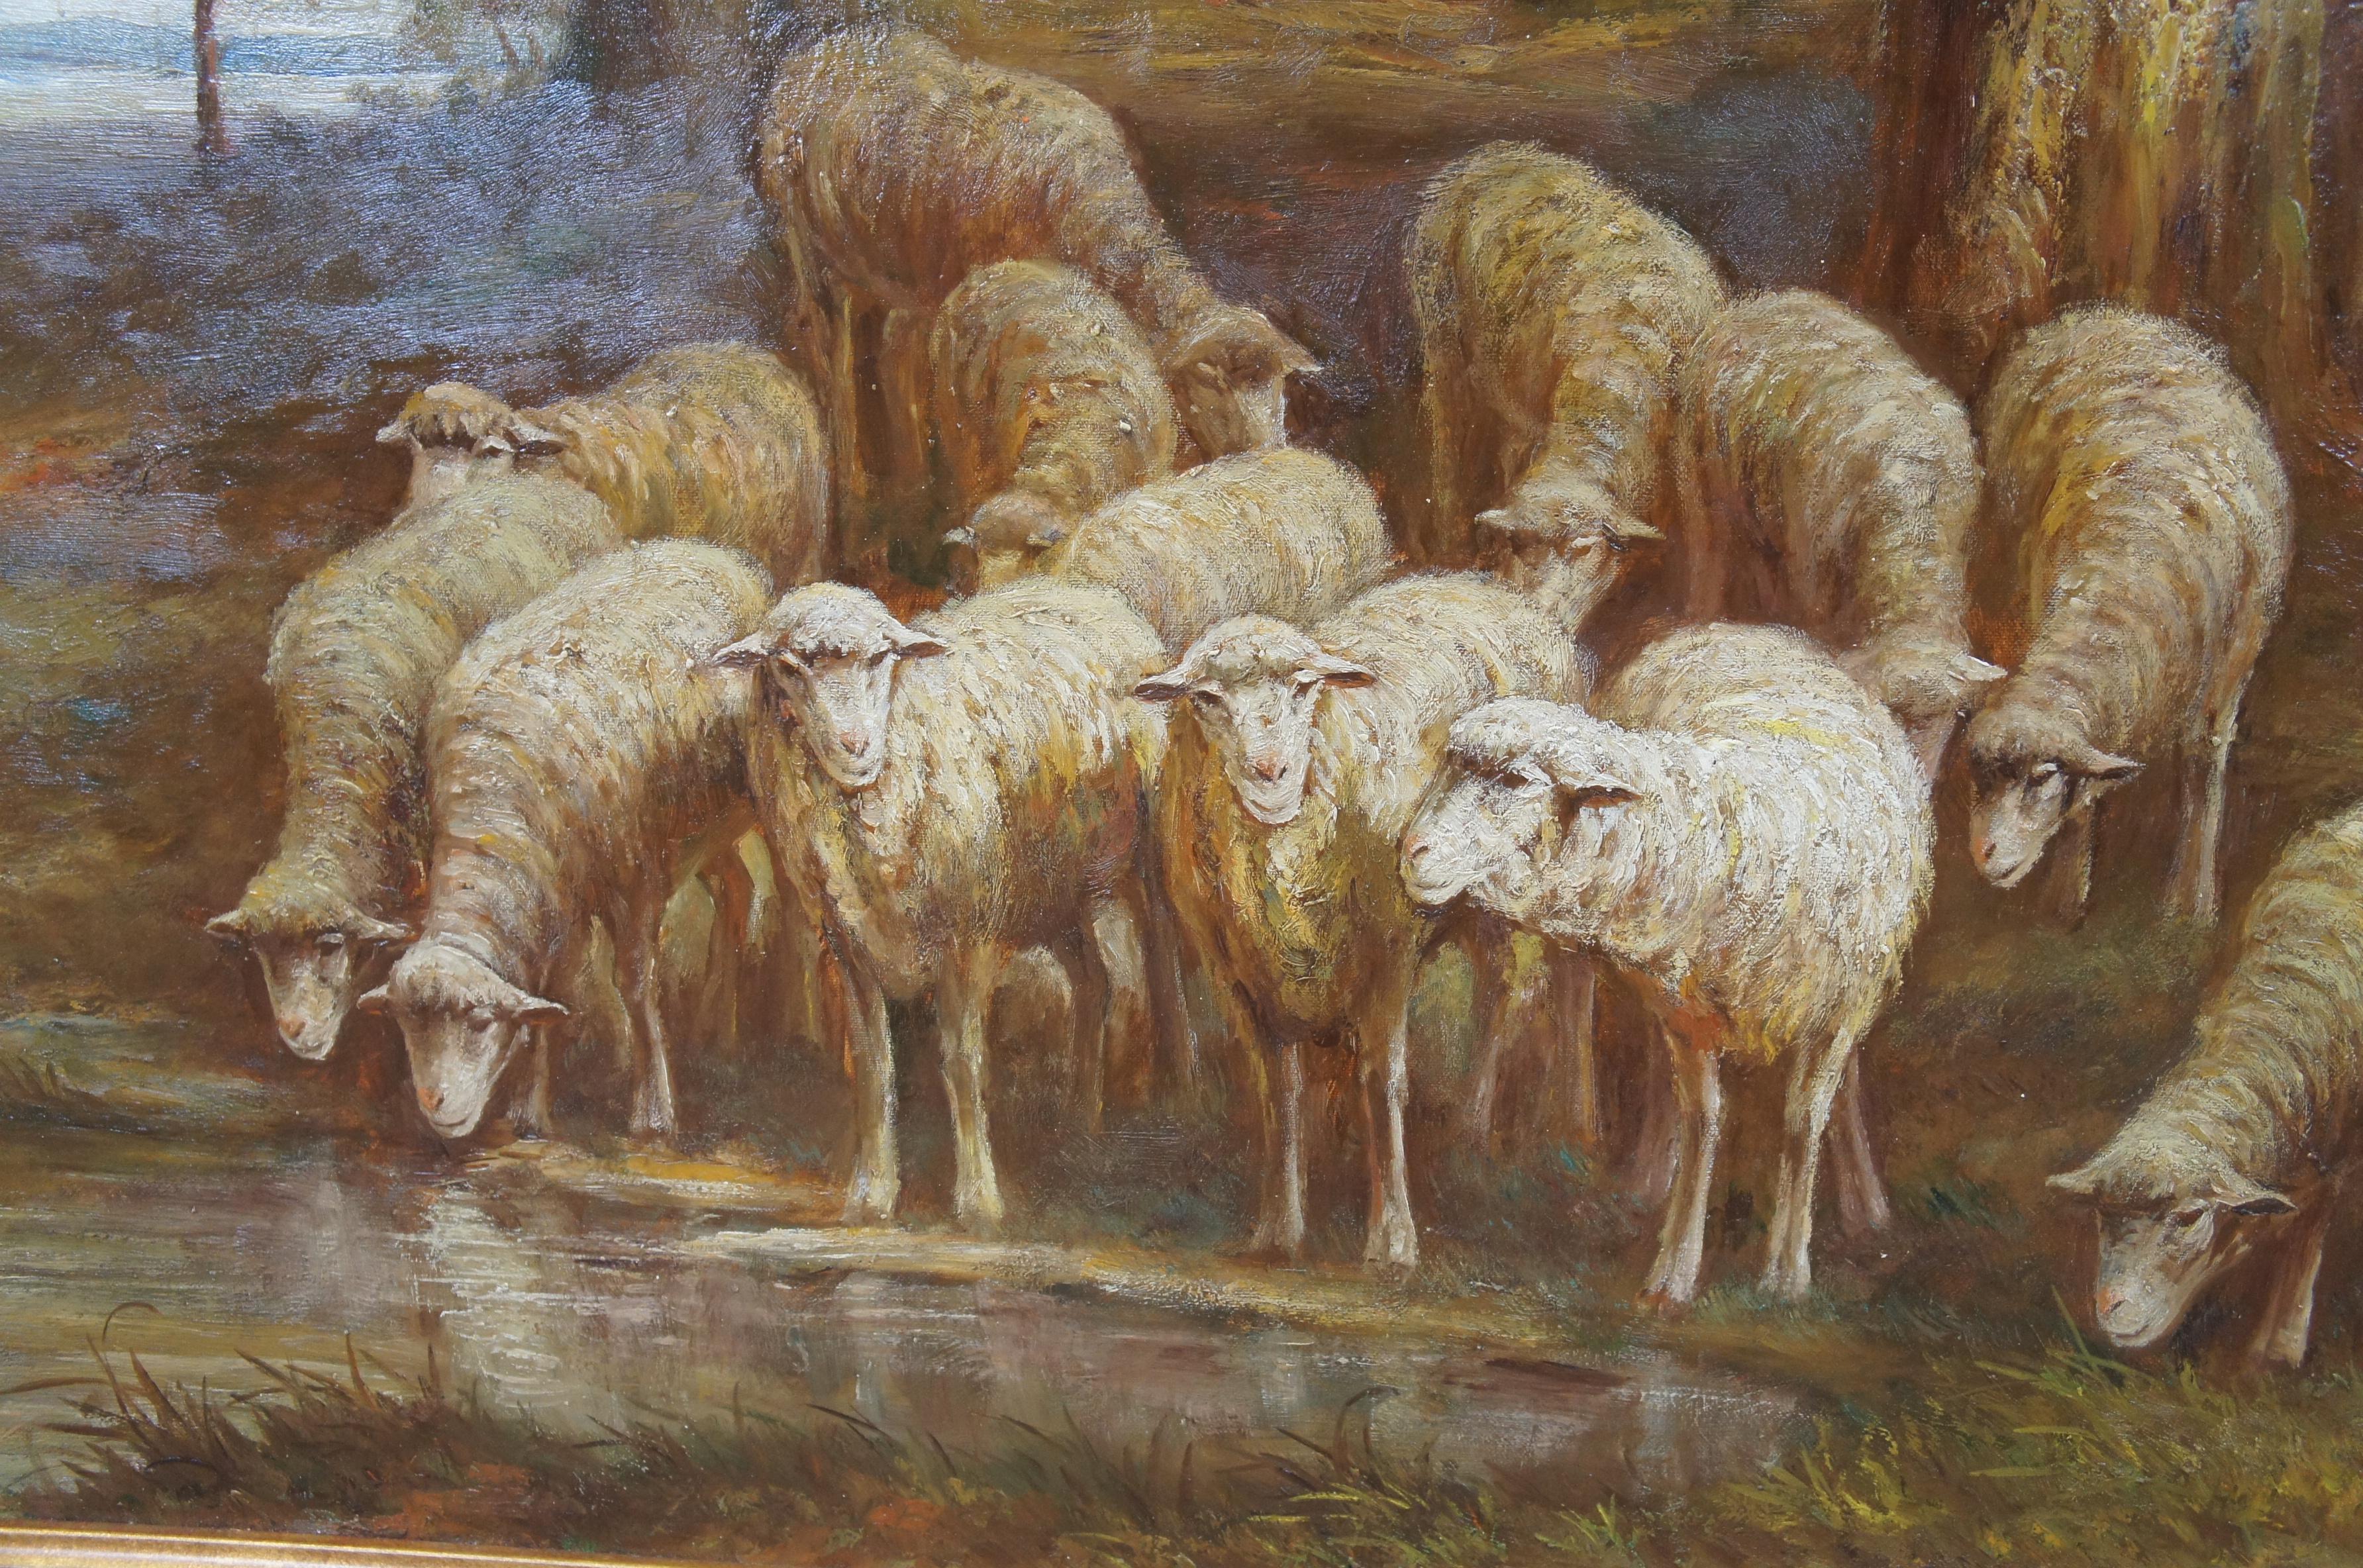 Assteyn Sheep Grazing Countryside Landscape Oil Painting on Canvas 49